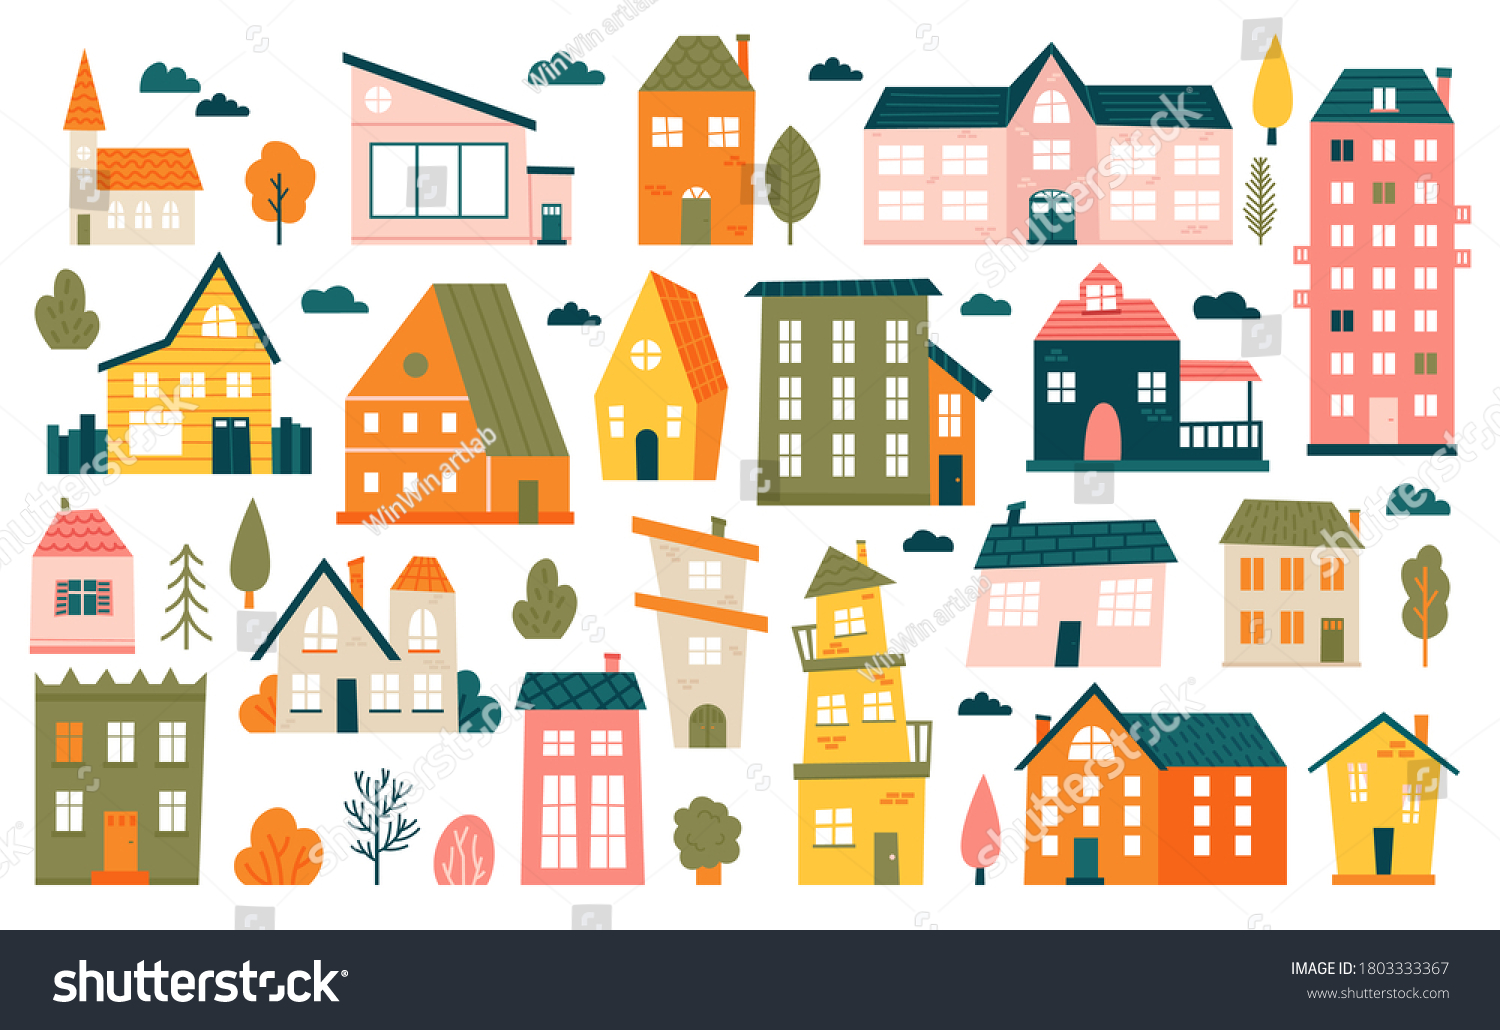 SVG of Cute tiny houses. Cartoon small town houses, minimalism city buildings, minimal suburban residential house vector illustration icons set. House small multicolour, structure town residential exterior svg